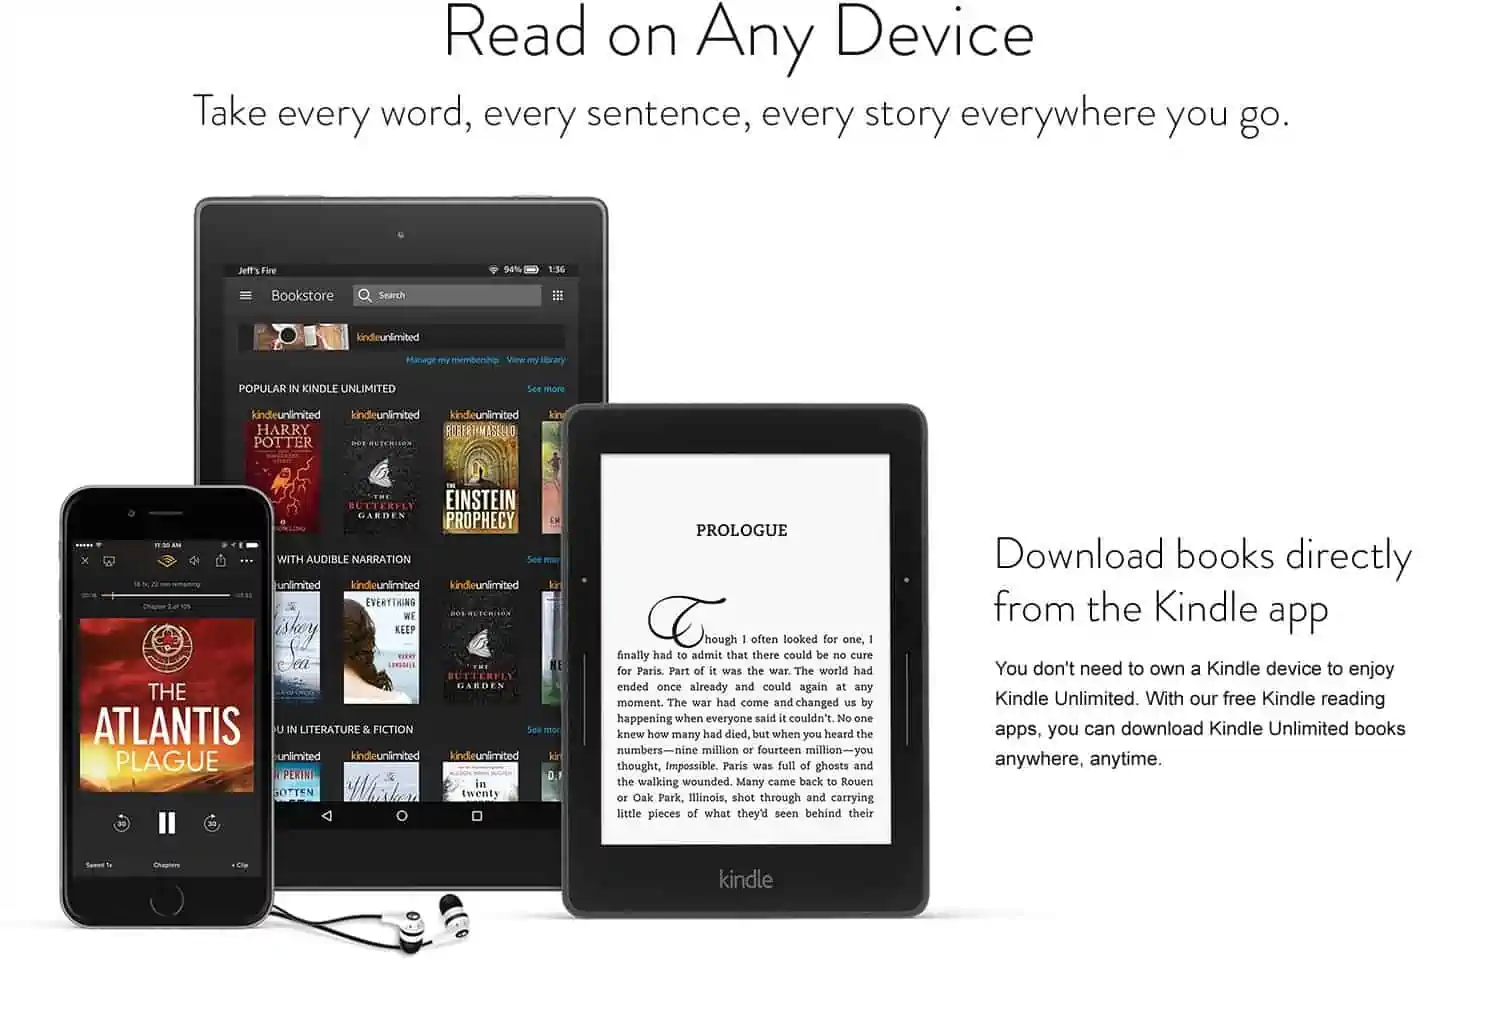 How to read a Kindle book on any device.